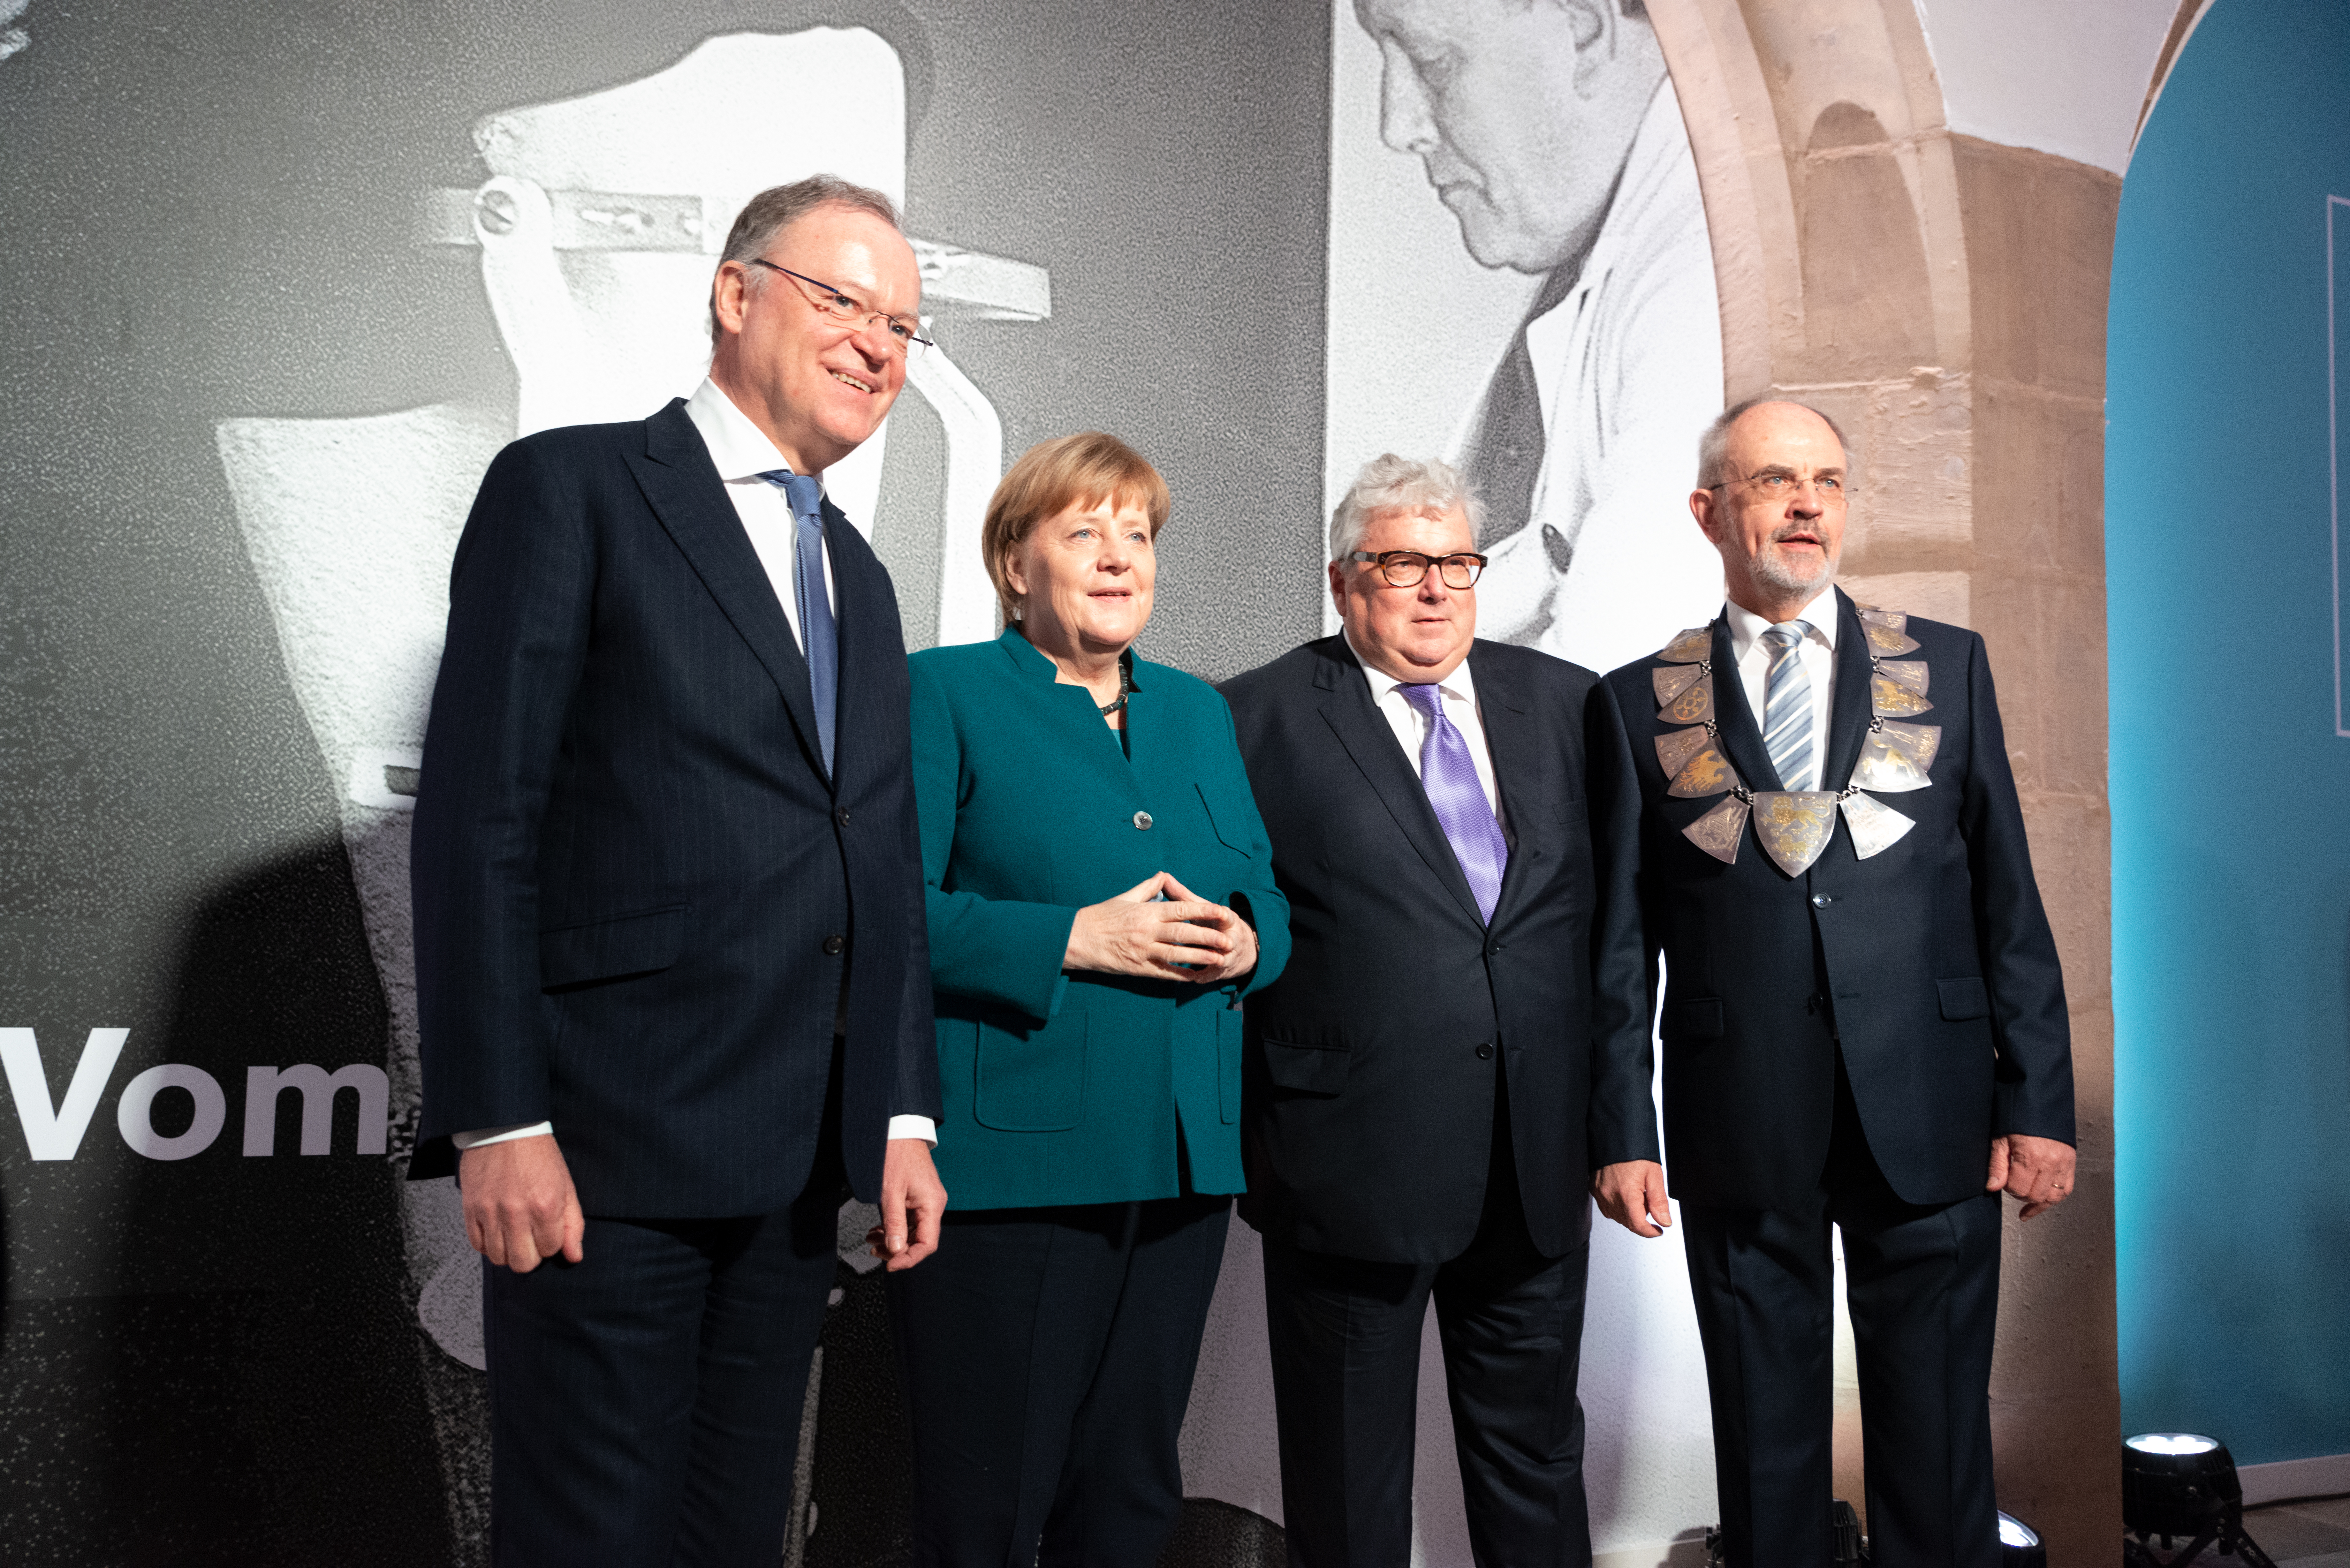 DR ANGELA MERKEL:”AN IMPORTANT YEAR AND JUBILEE FOR OTTOBOCK AND GERMANY.”